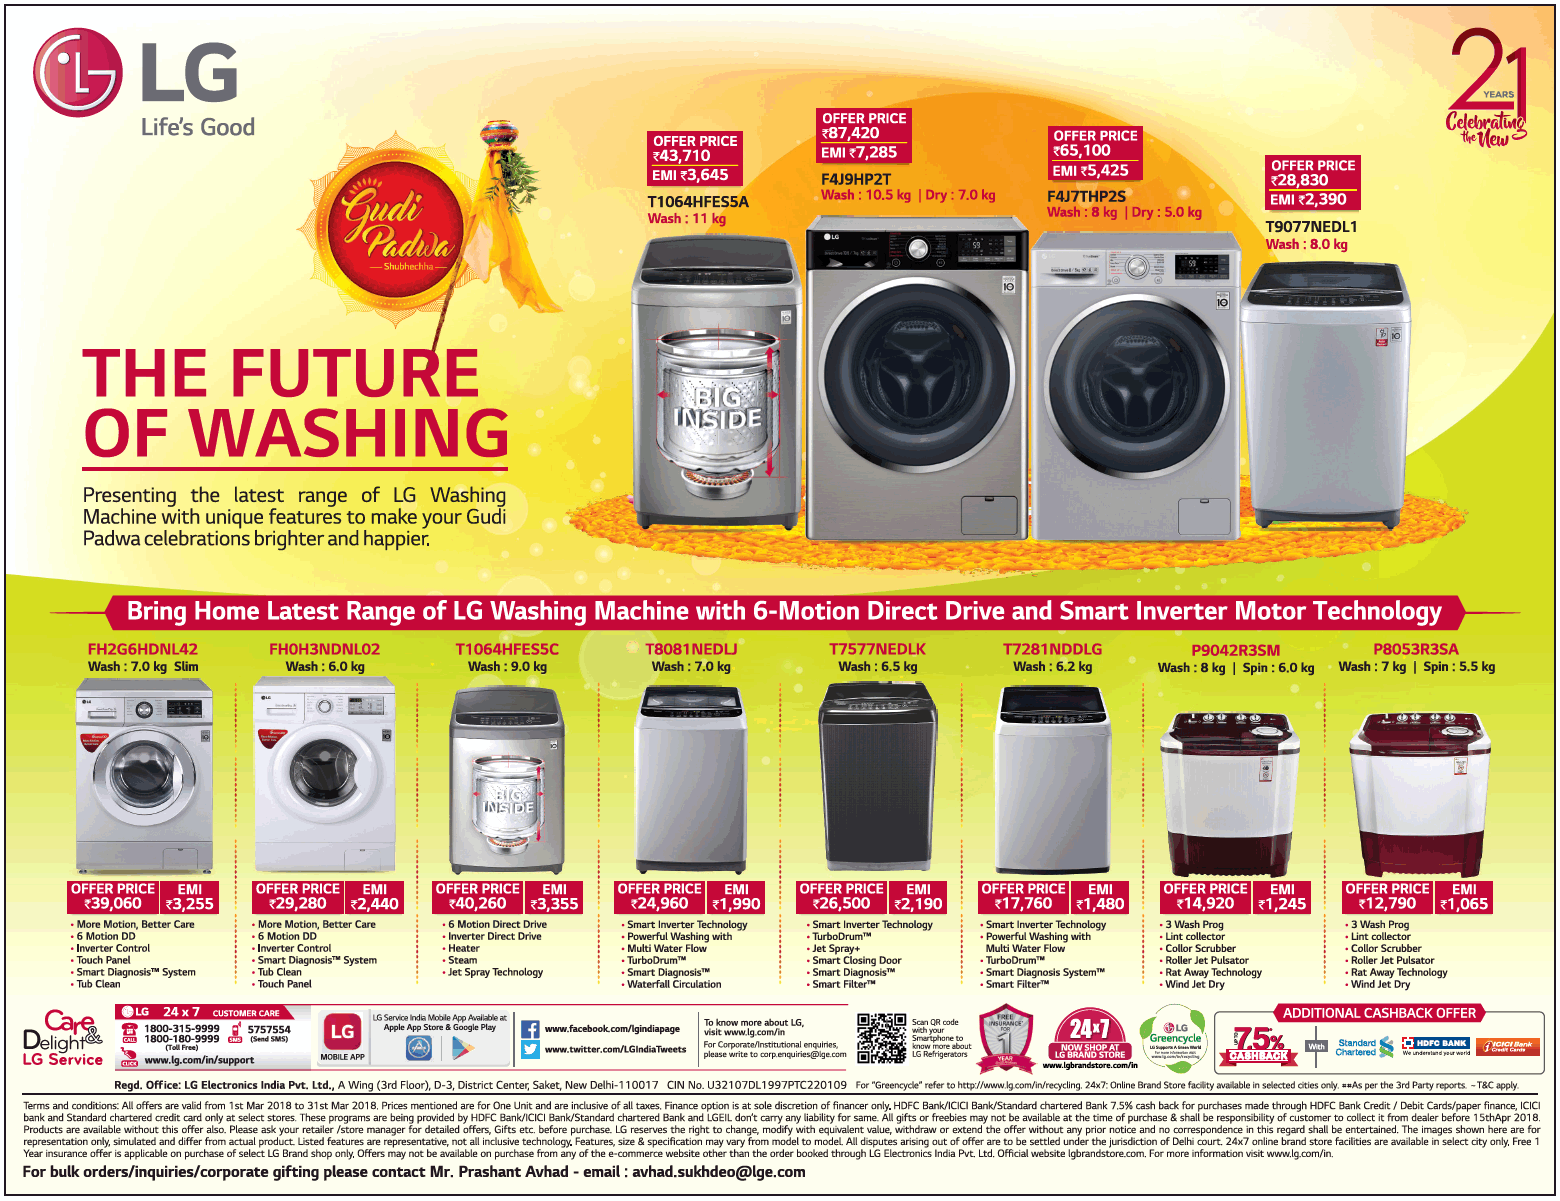 Lg Lifes Good The Future Of Washing Ad - Advert Gallery